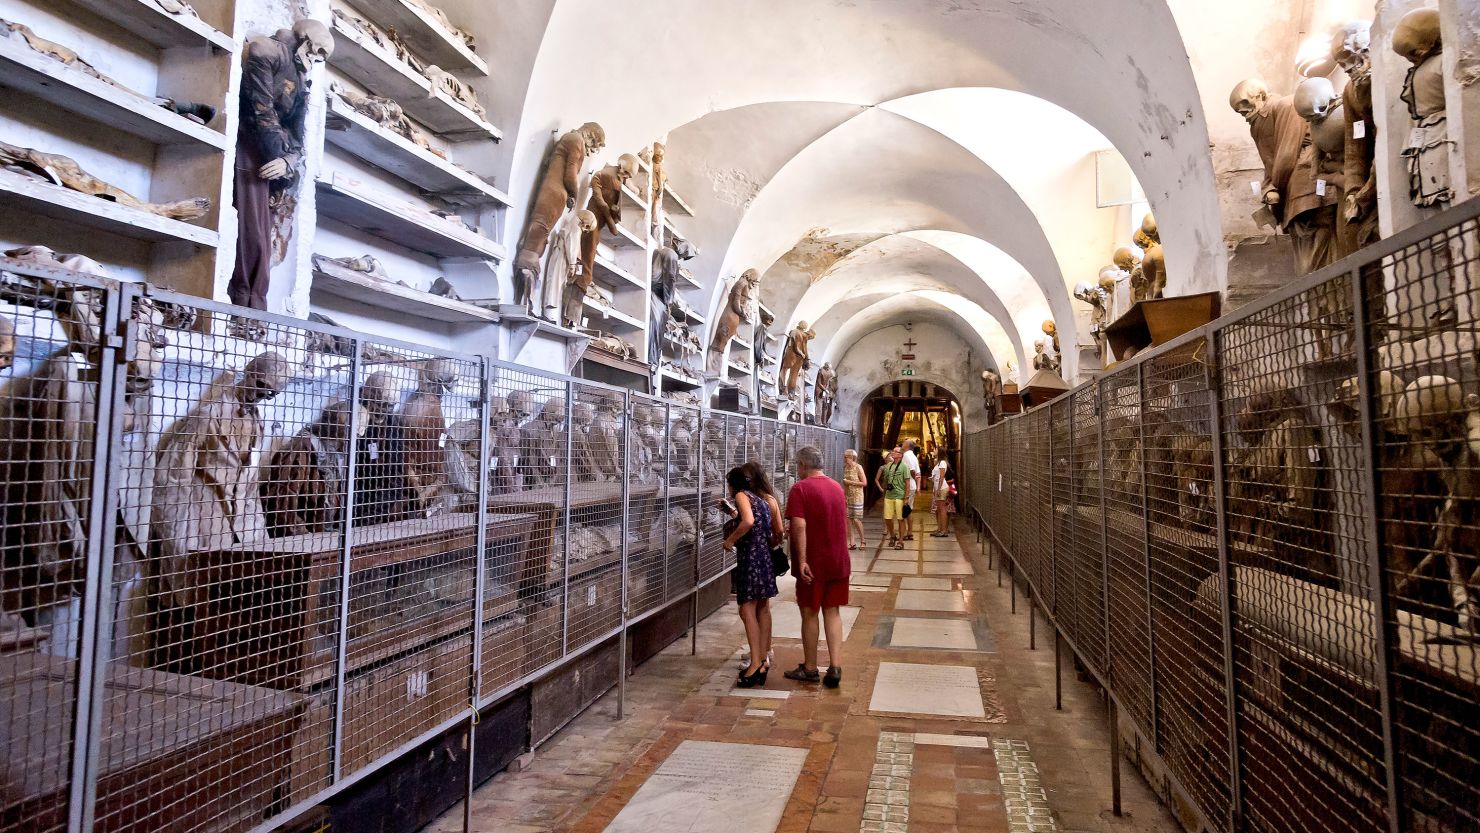 The catacombs hold the largest collection of mummified remains in Europe.